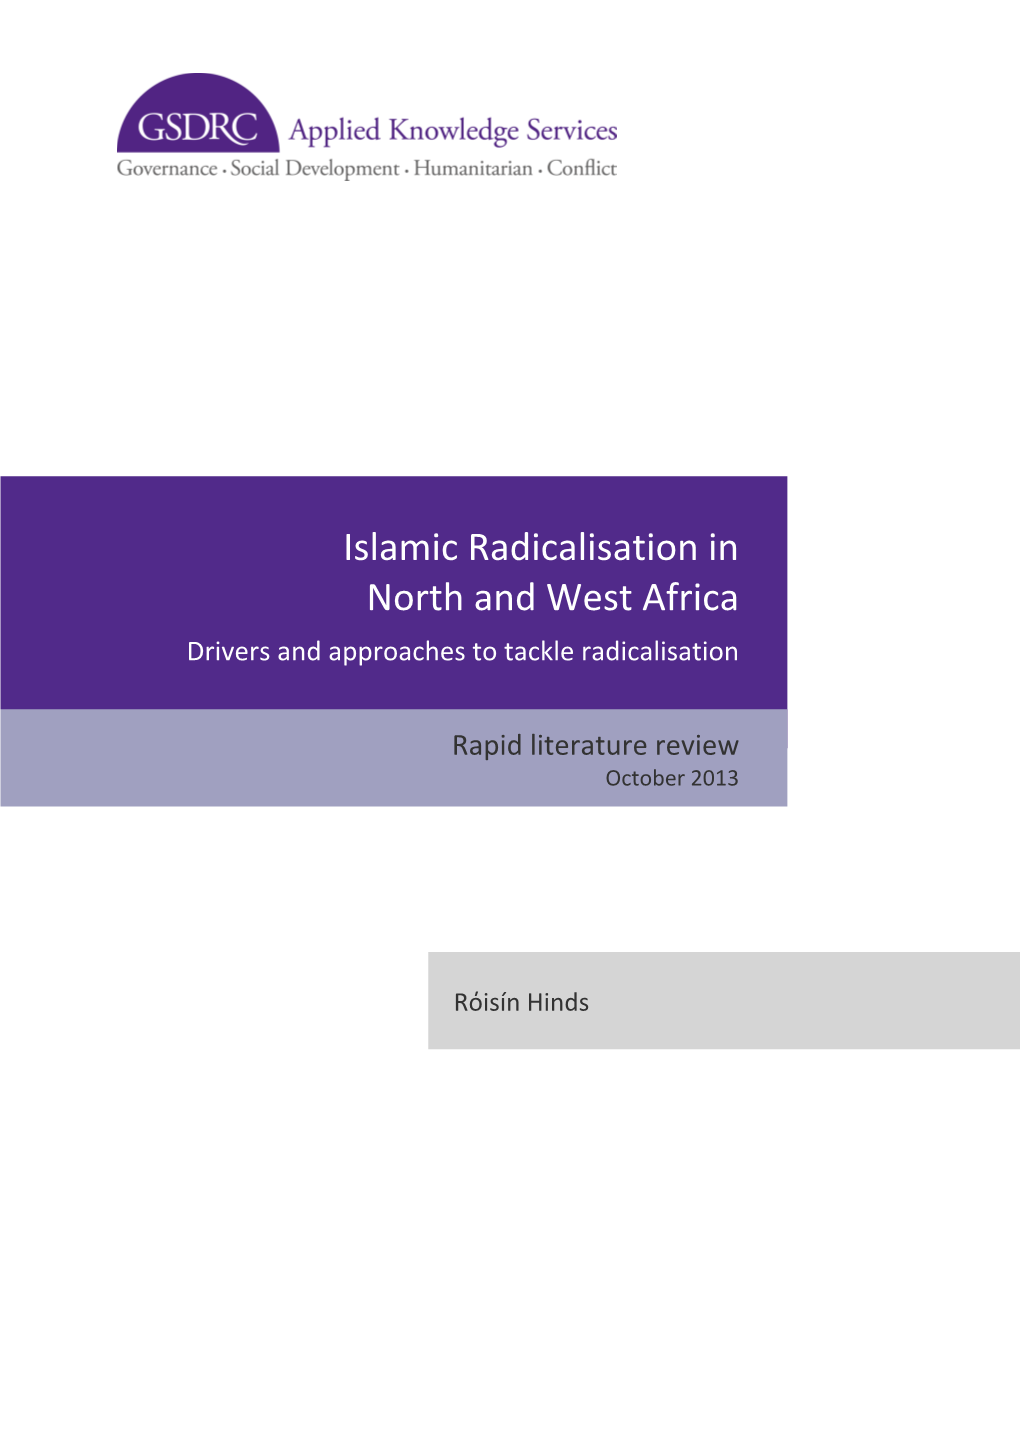 Islamic Radicalisation in North and West Africa Drivers and Approaches to Tackle Radicalisation